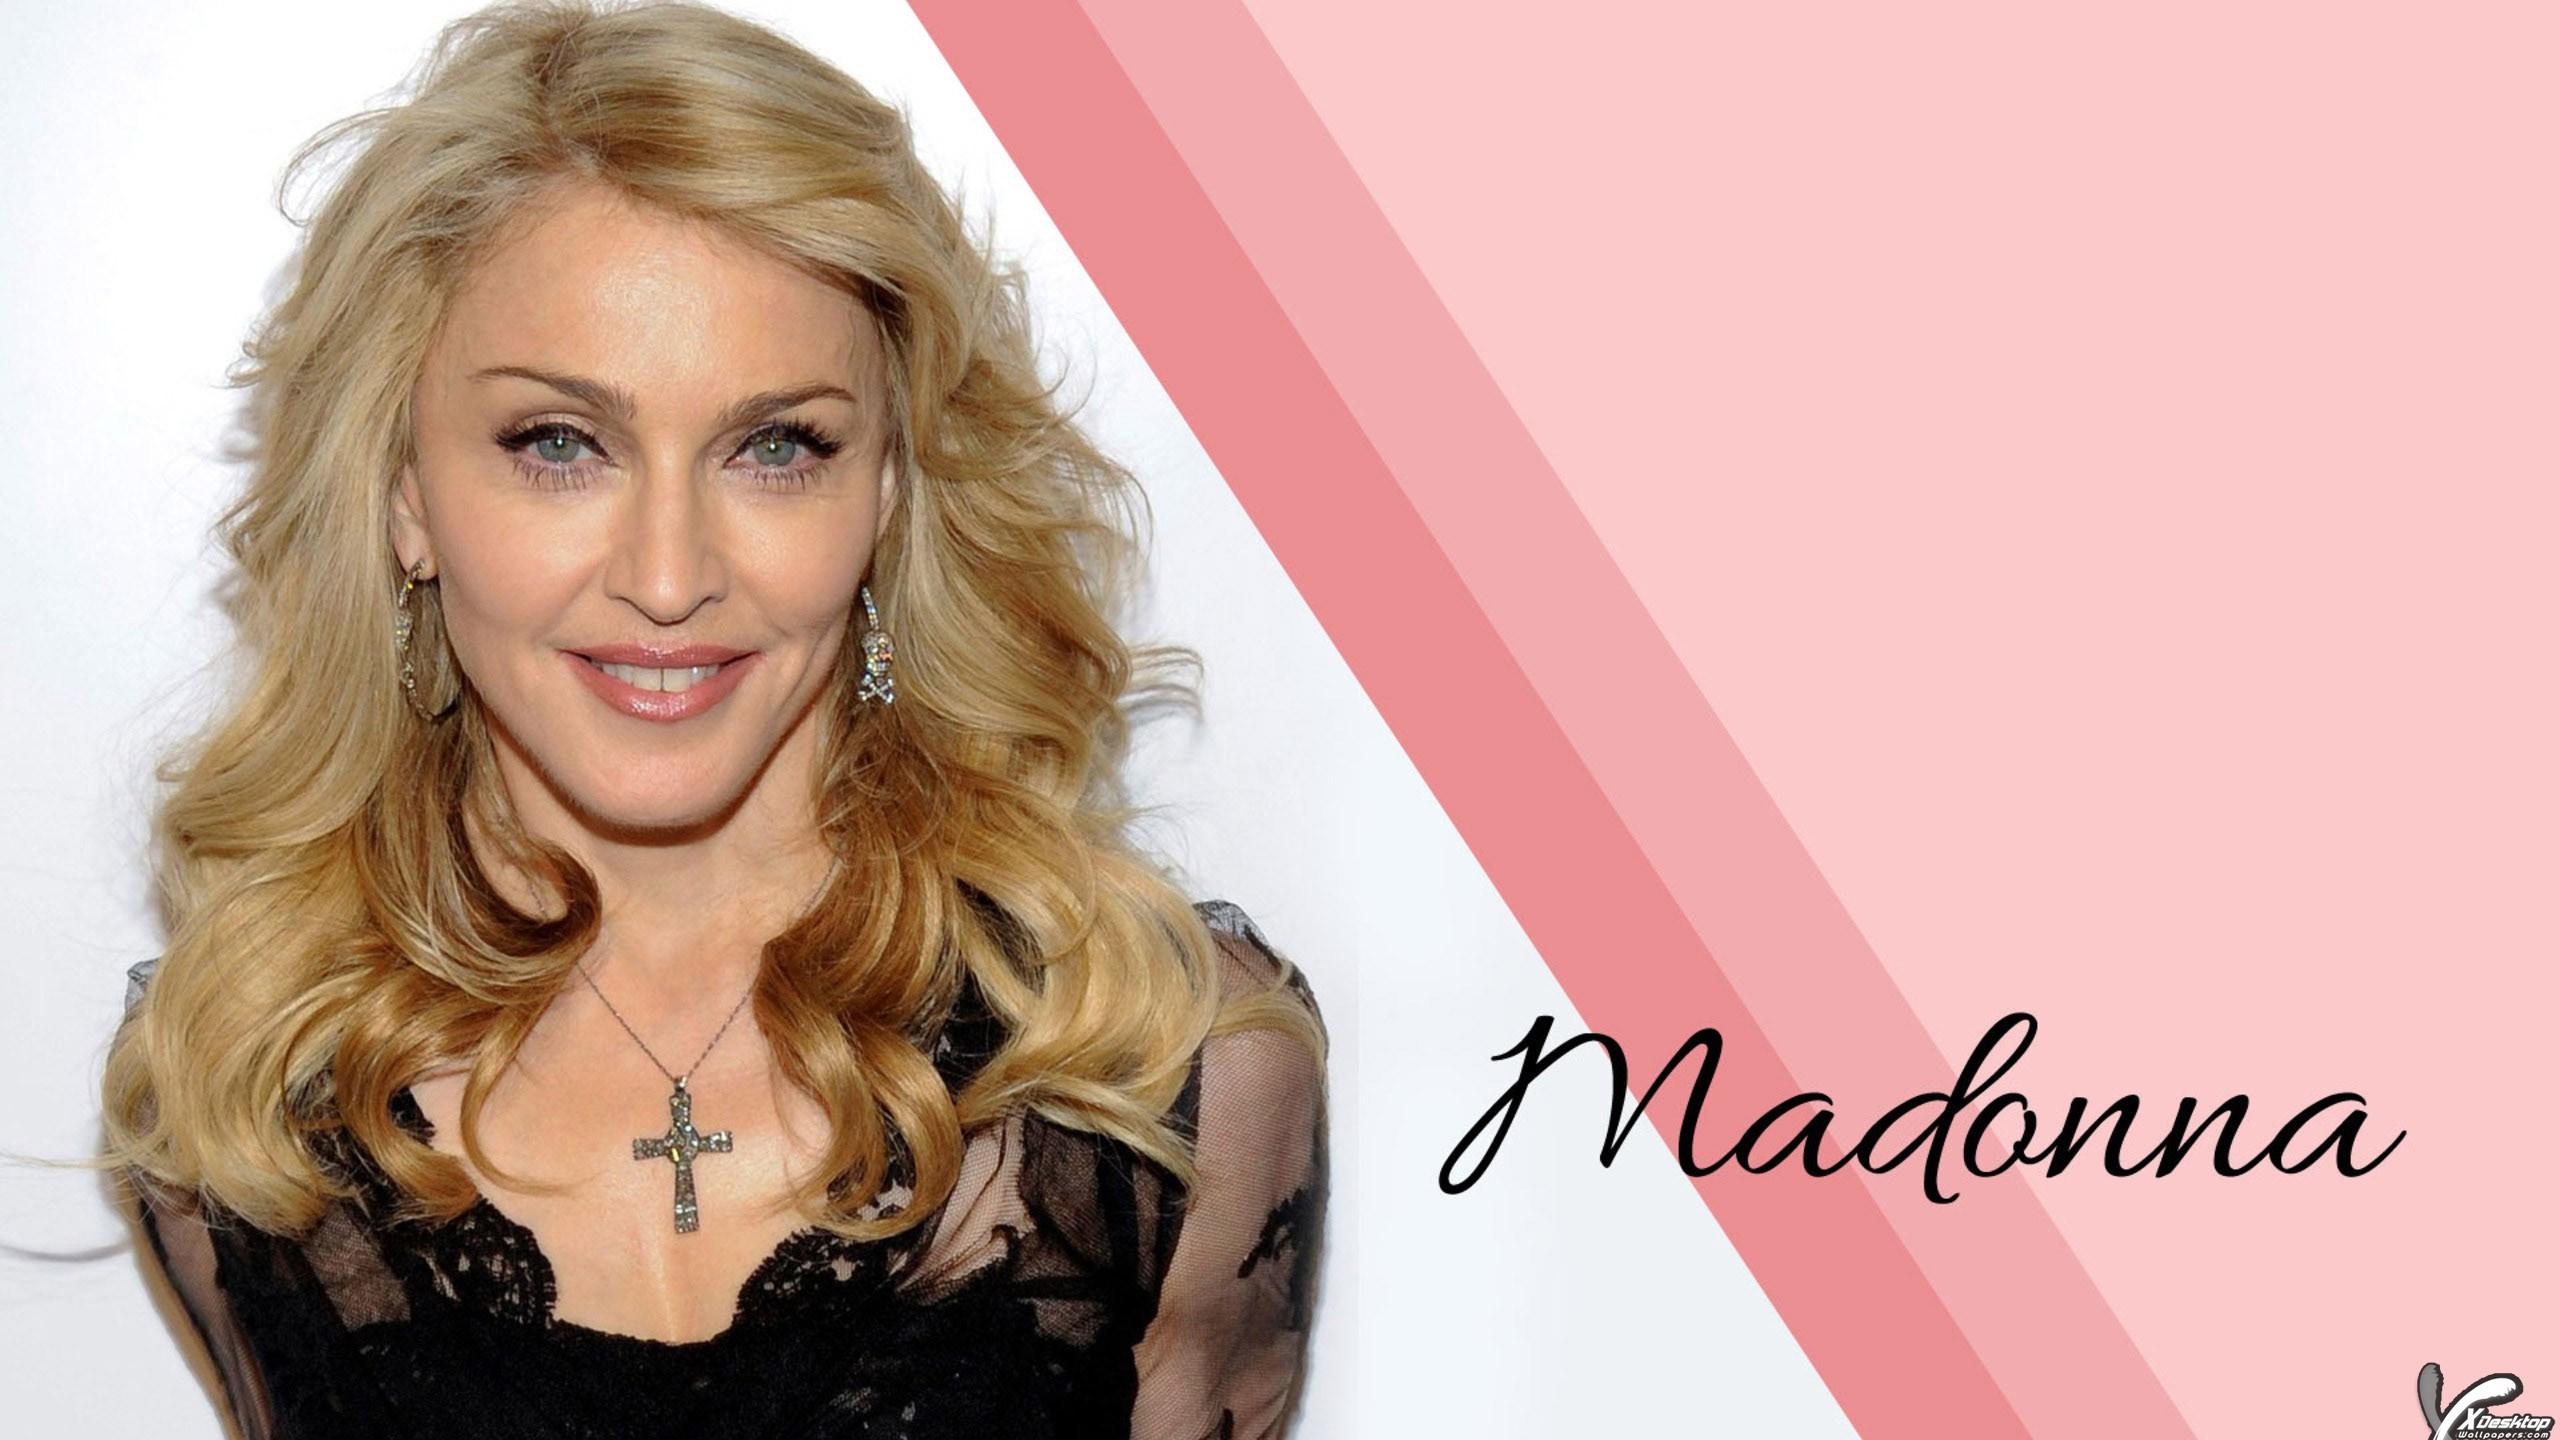 Madonna Wallpaper, Photo & Image in HD